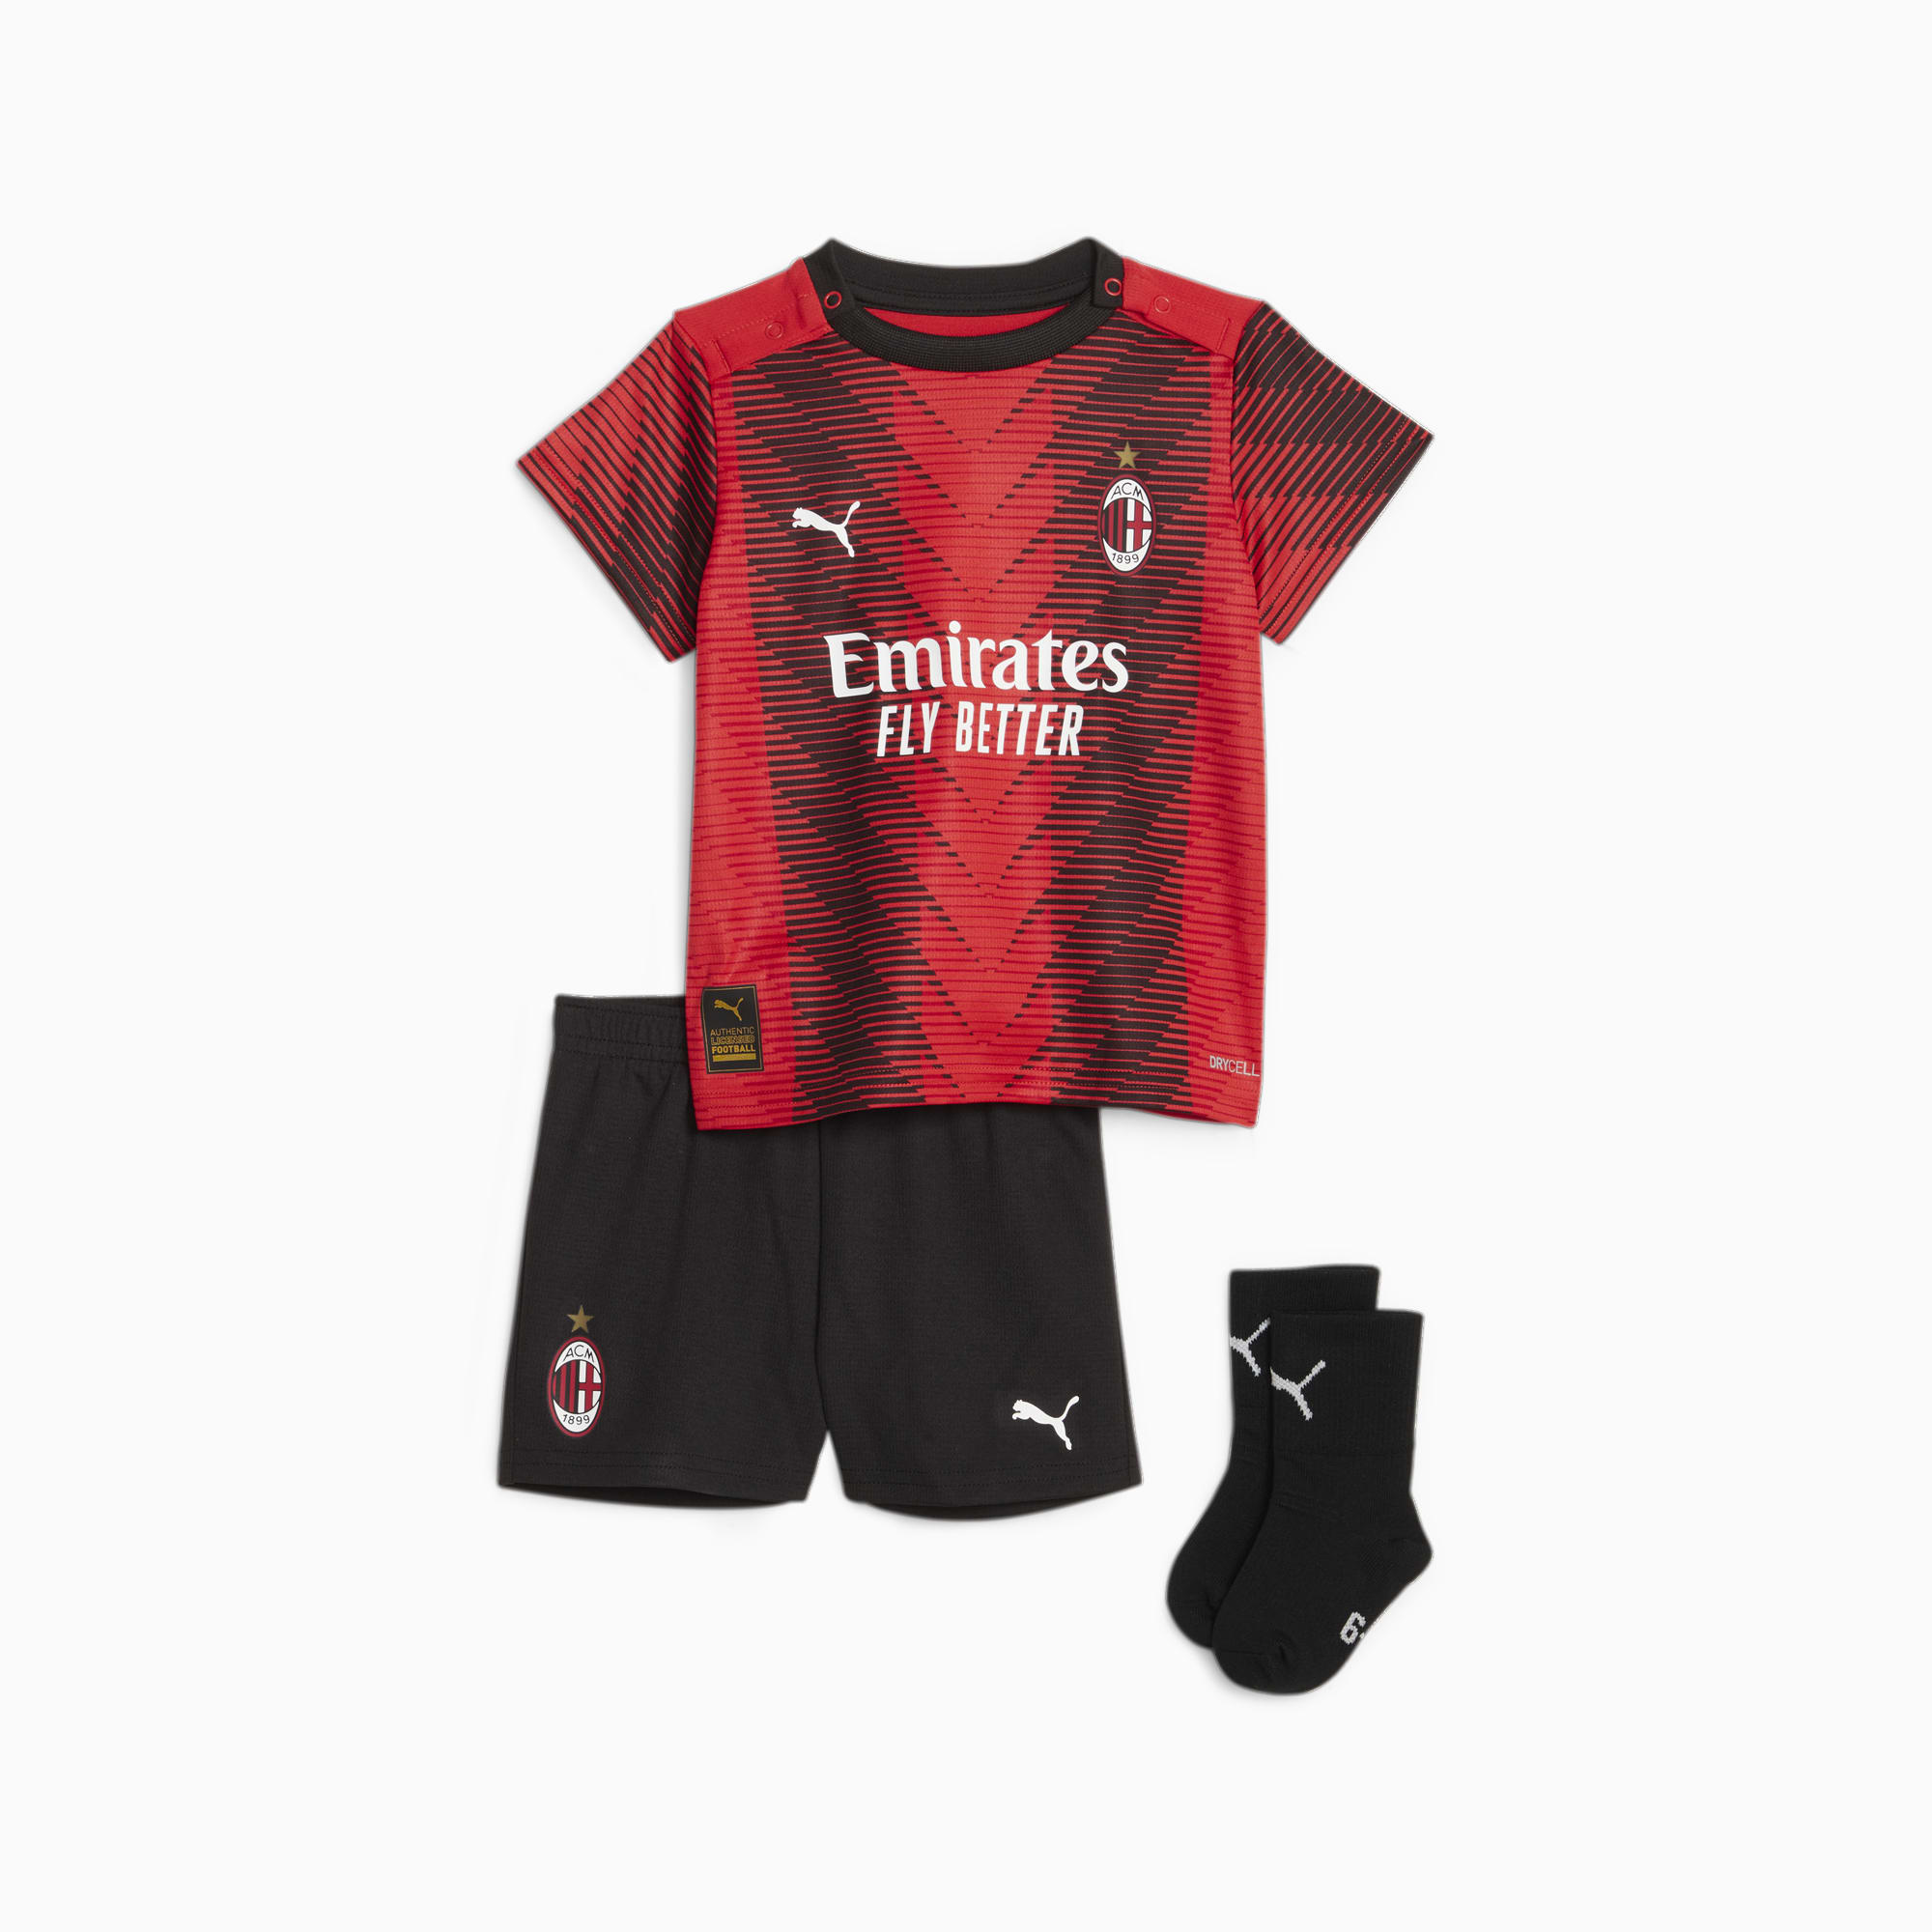 PUMA A.C. Milan 23/24 Home Baby Kit, For All Time Red/Black, Size 68, Clothing